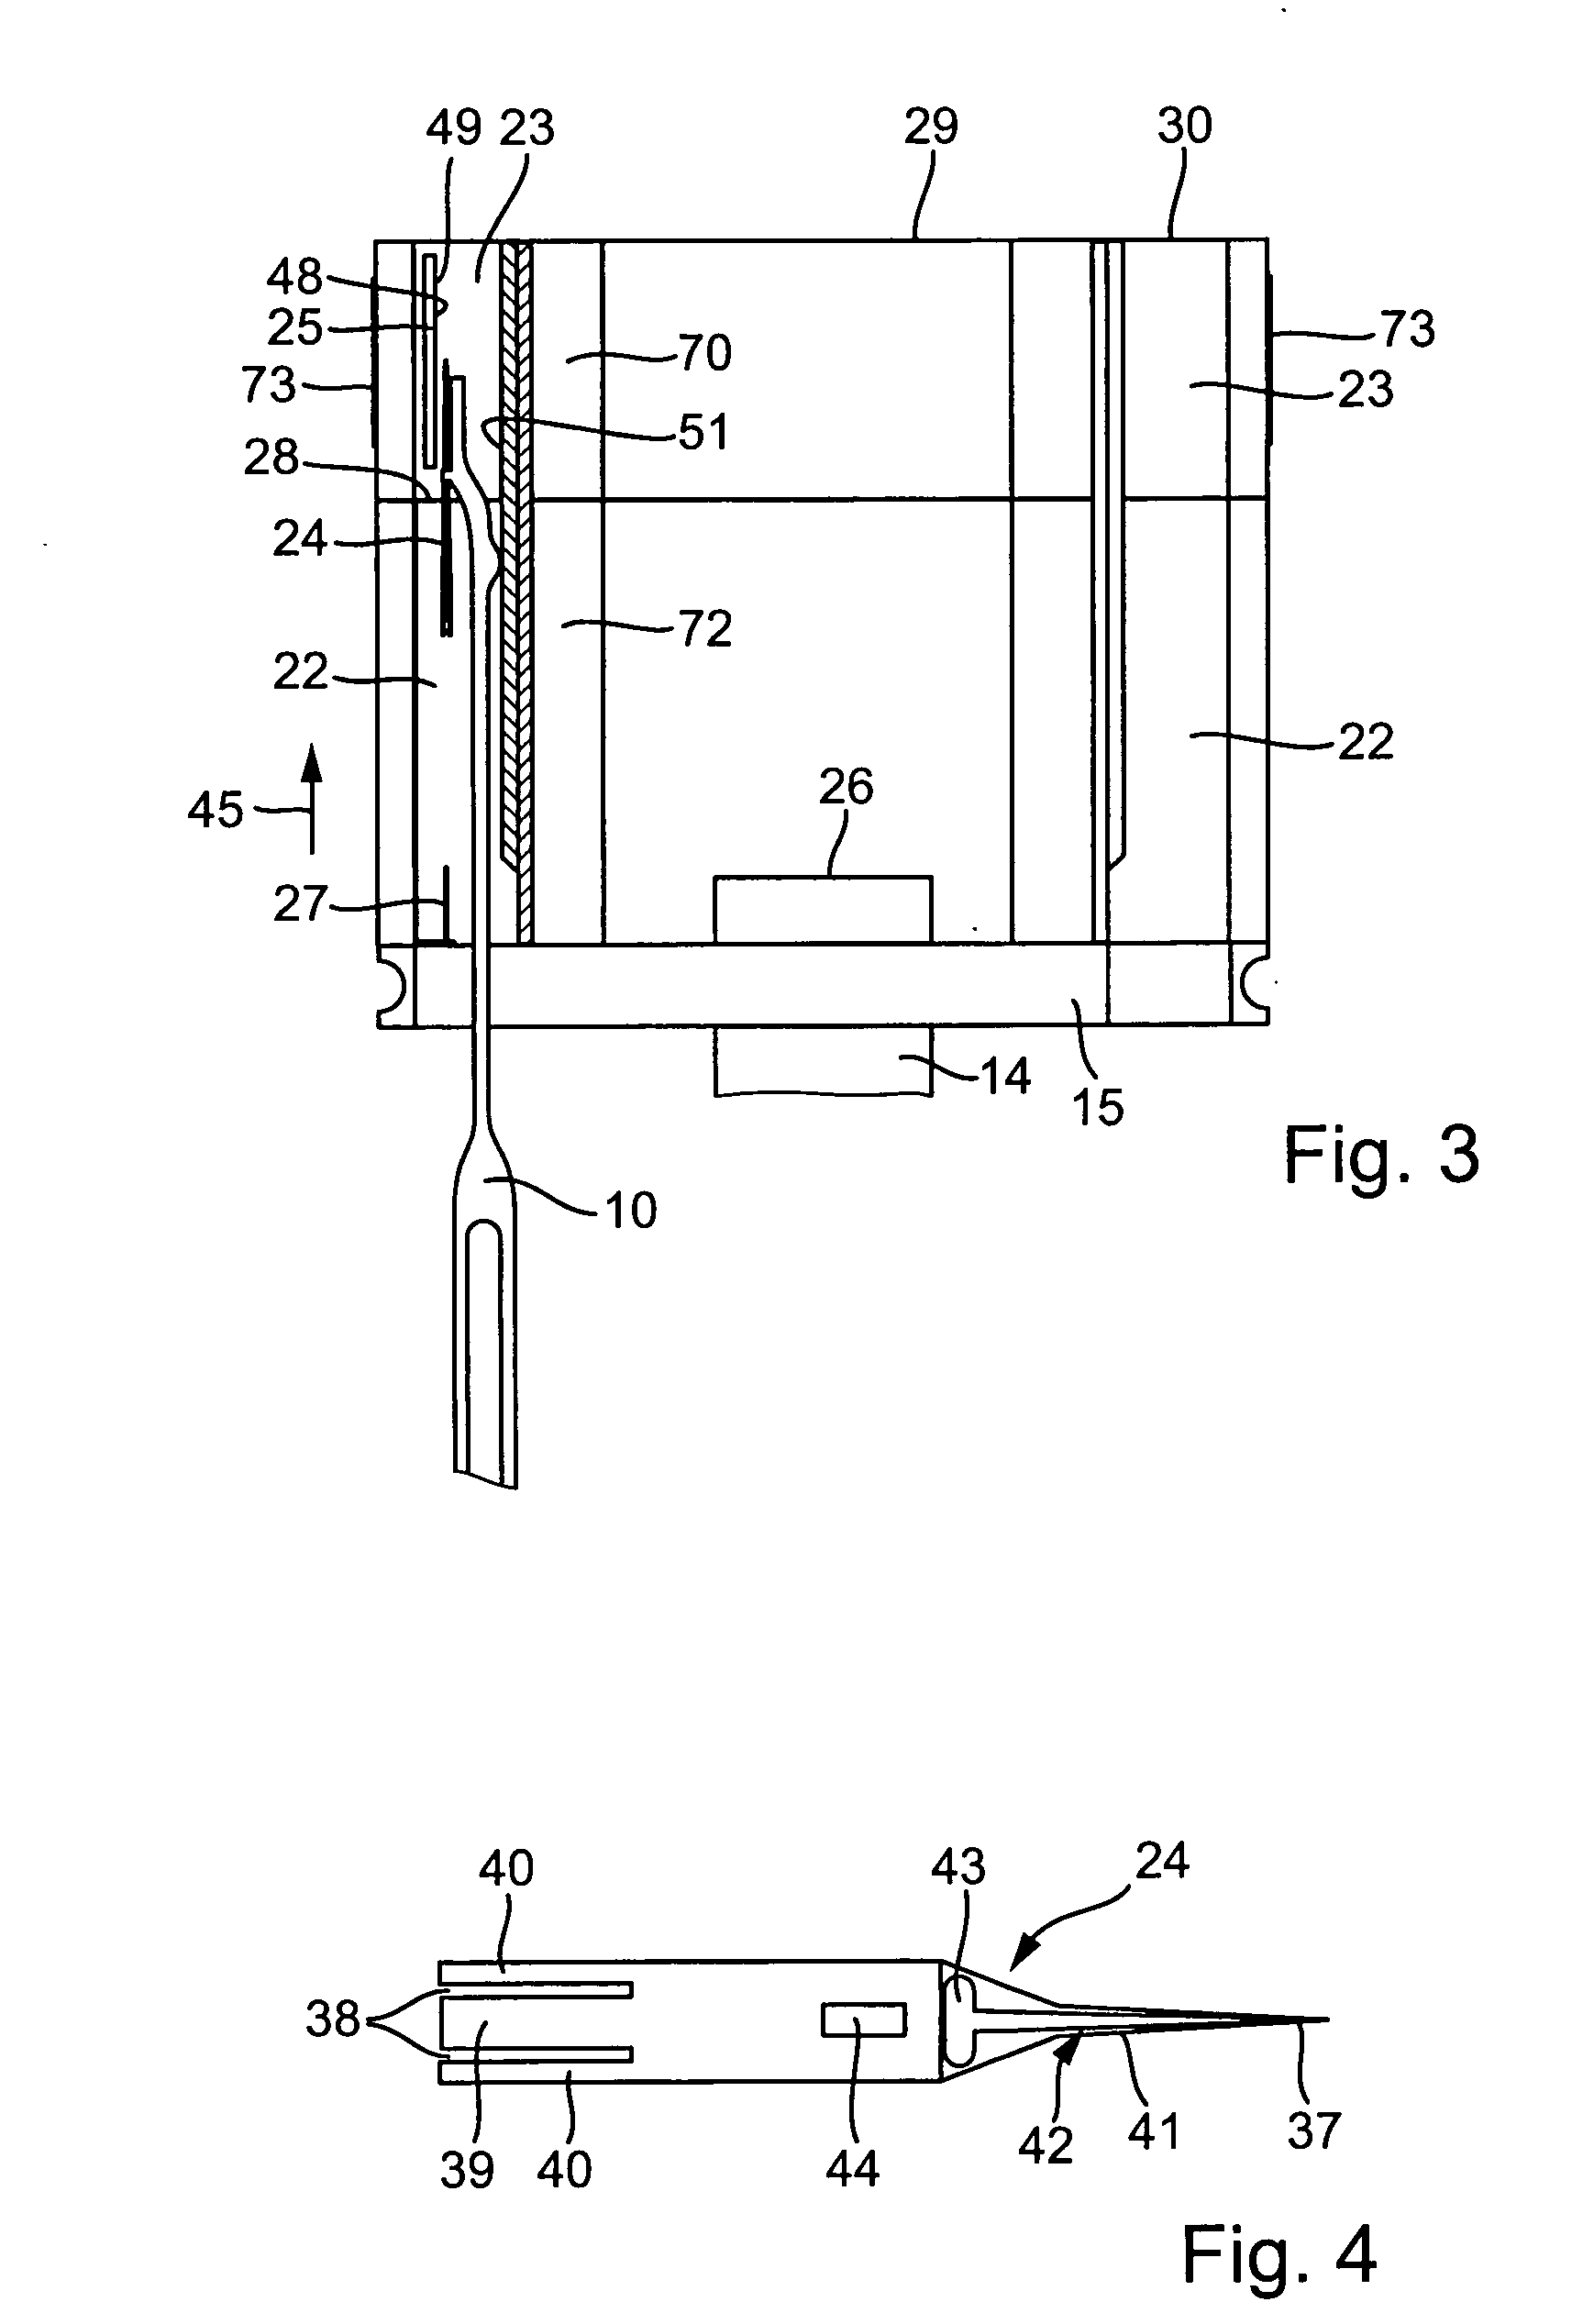 Analysis system and method for determining an analyte in a body fluid